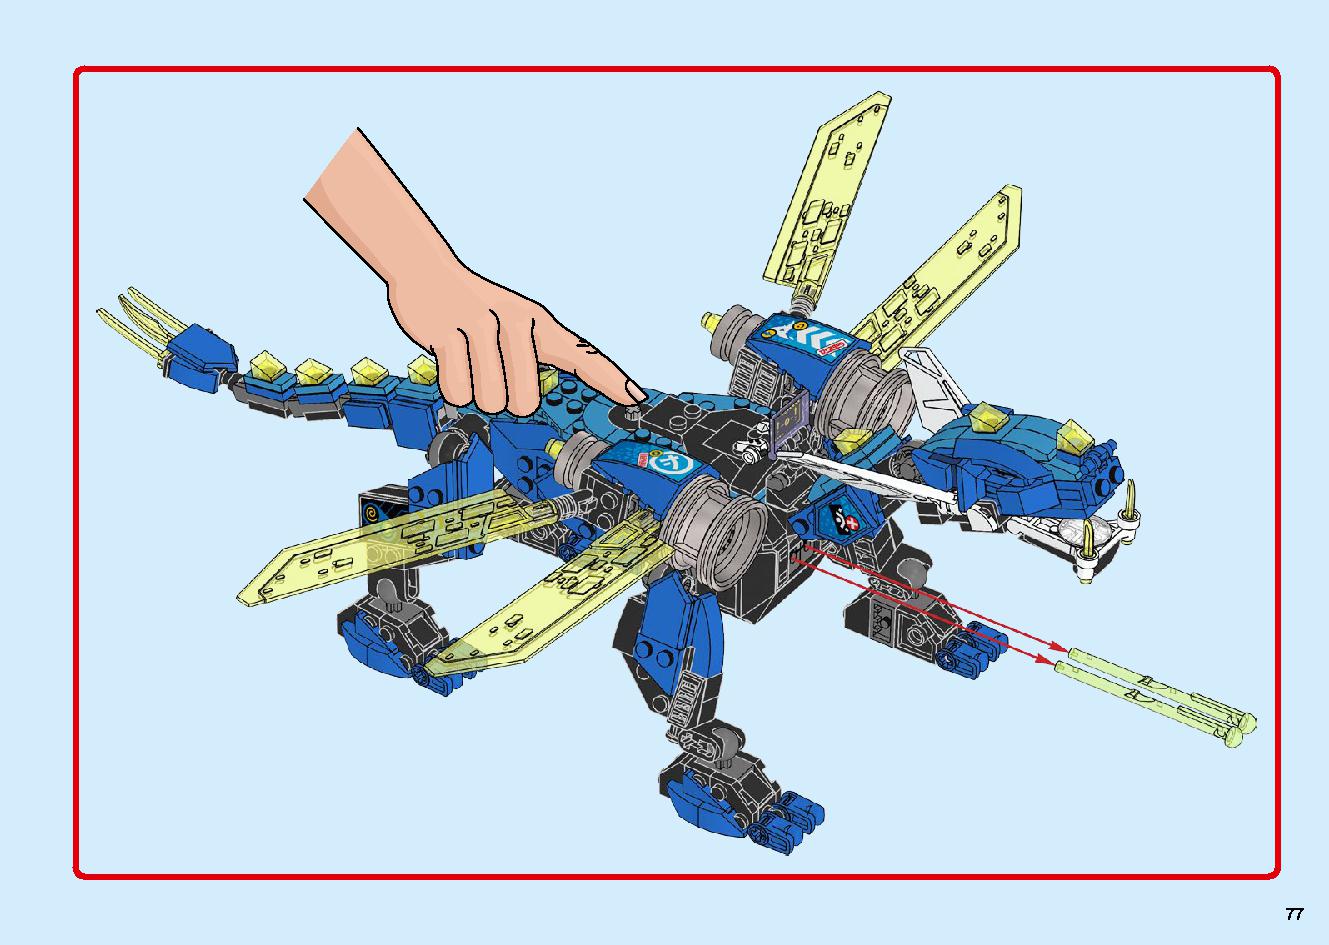 Jay's Cyber Dragon 71711 LEGO information LEGO instructions 77 page